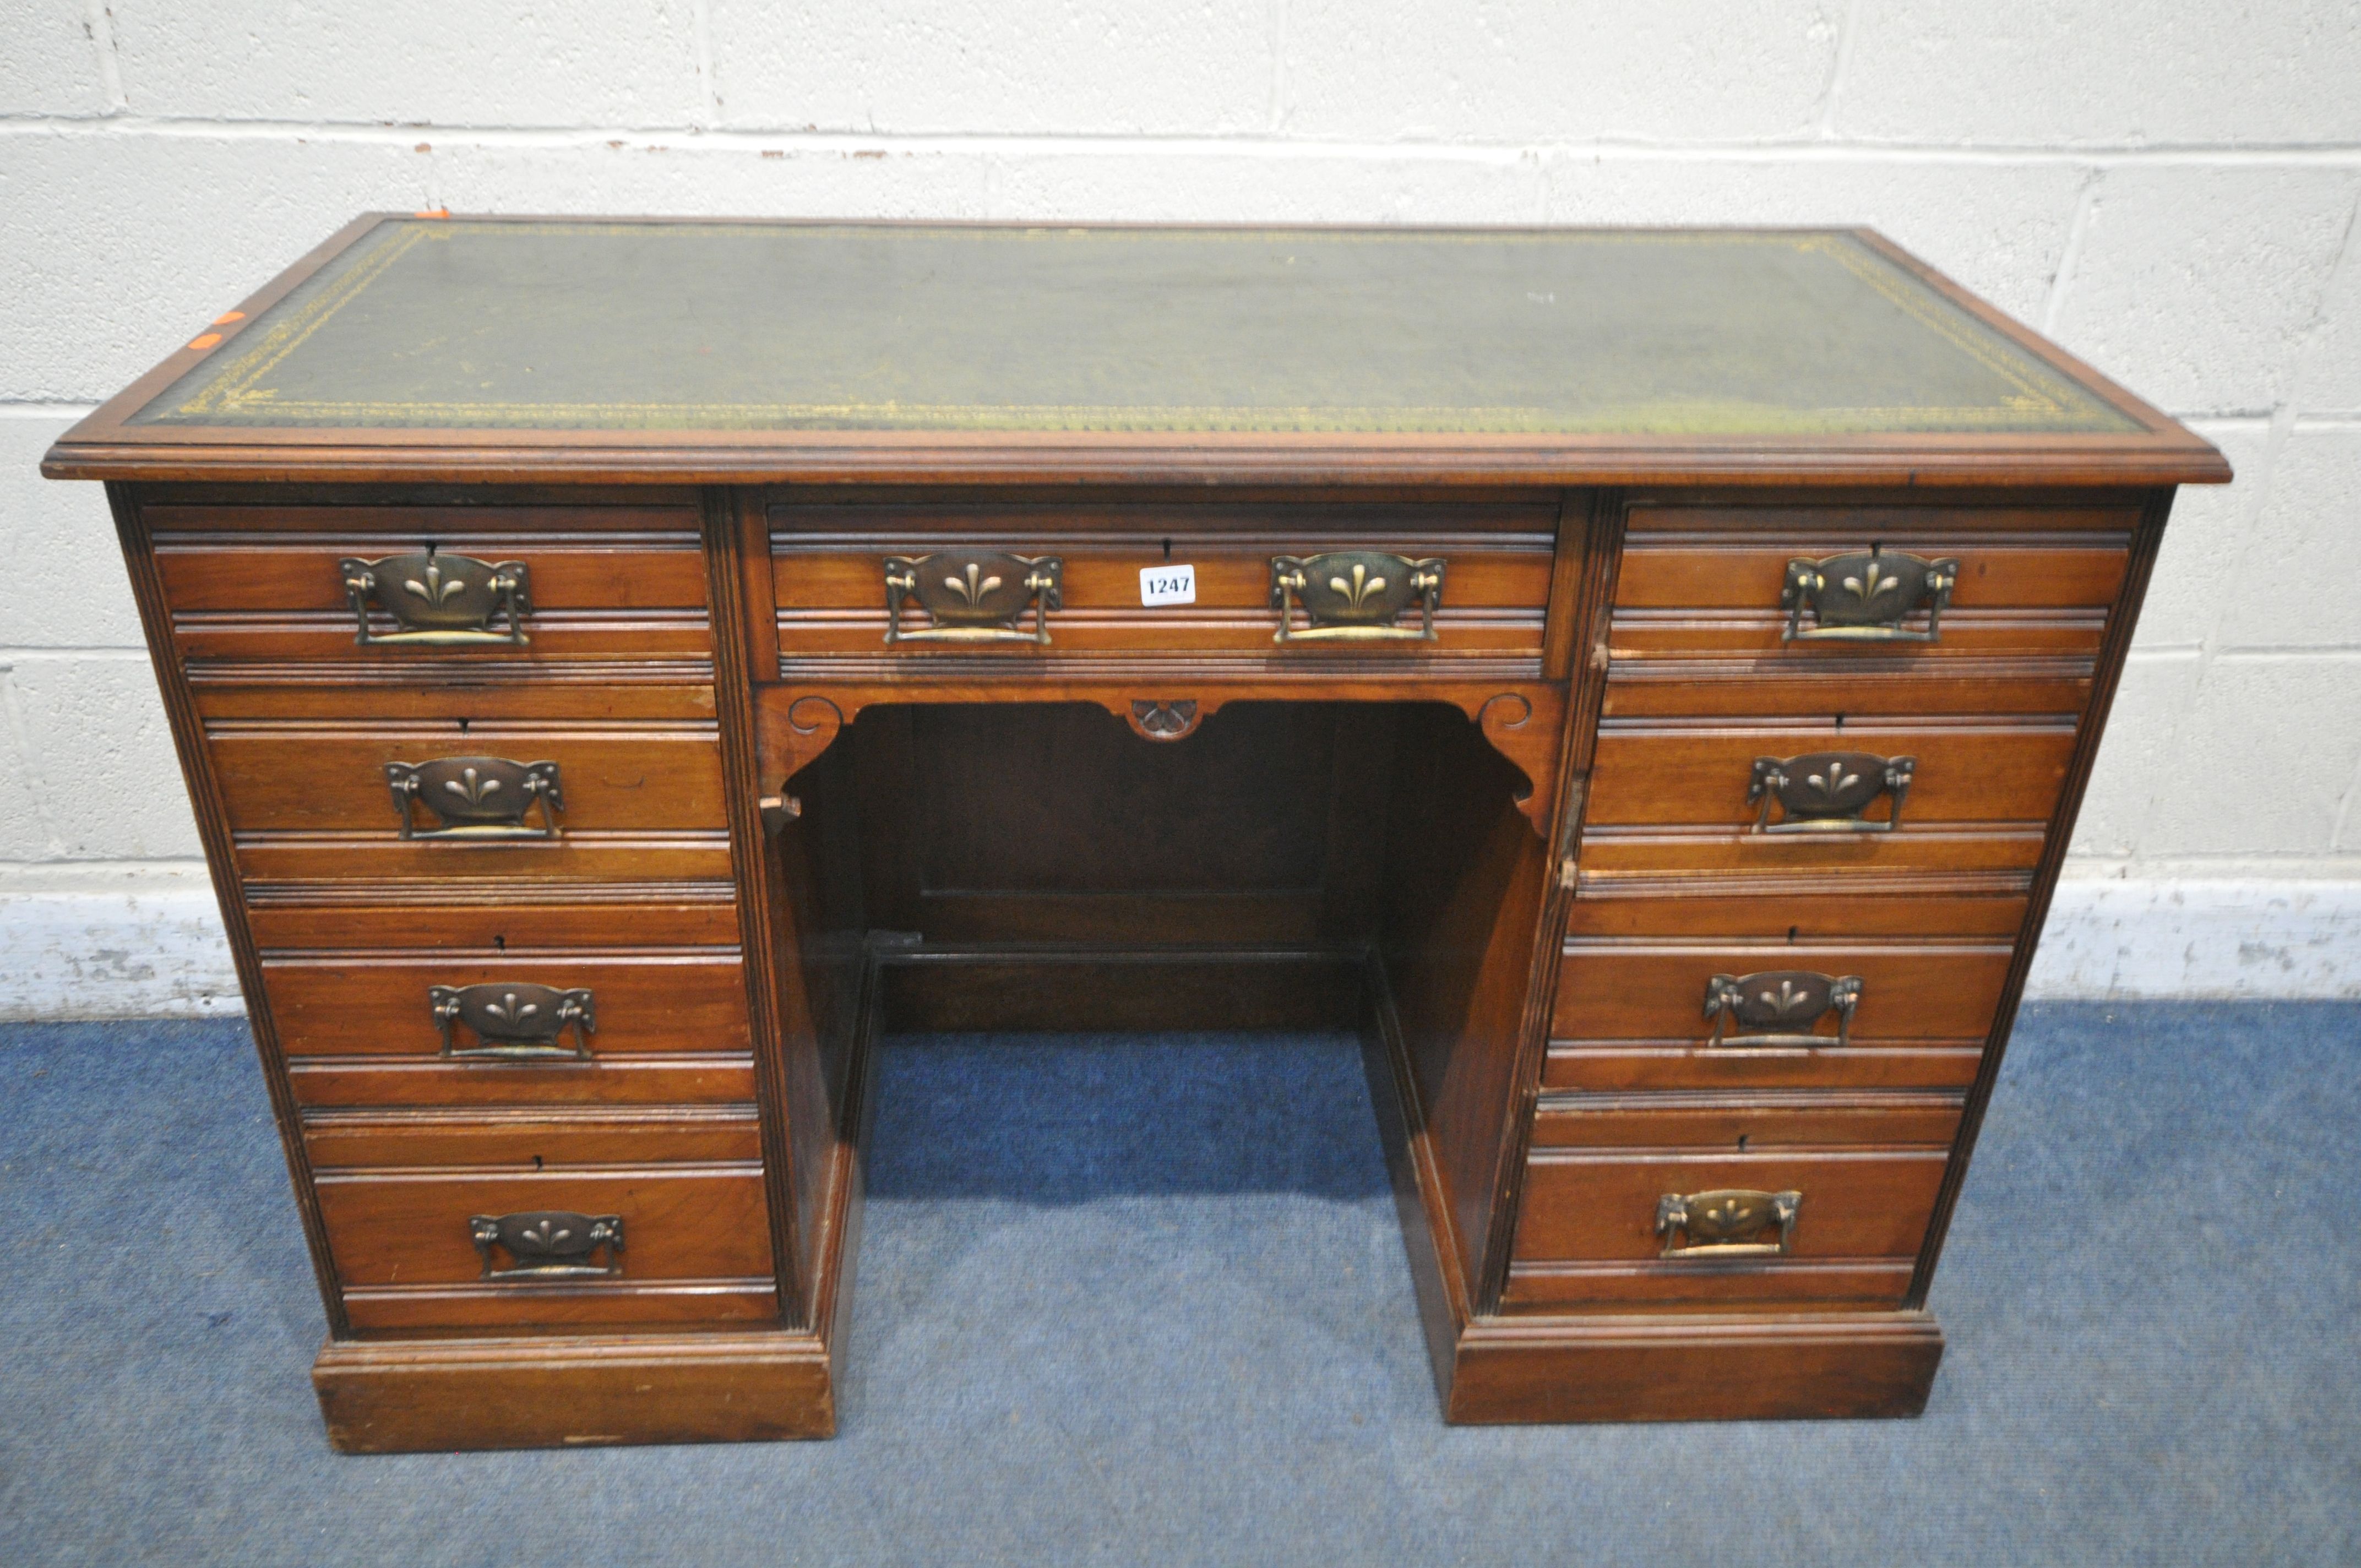 AN EDWARDIAN WALNUT KNEE HOLE DESK, with a green gilt tooled leather inlay writing surface, and an